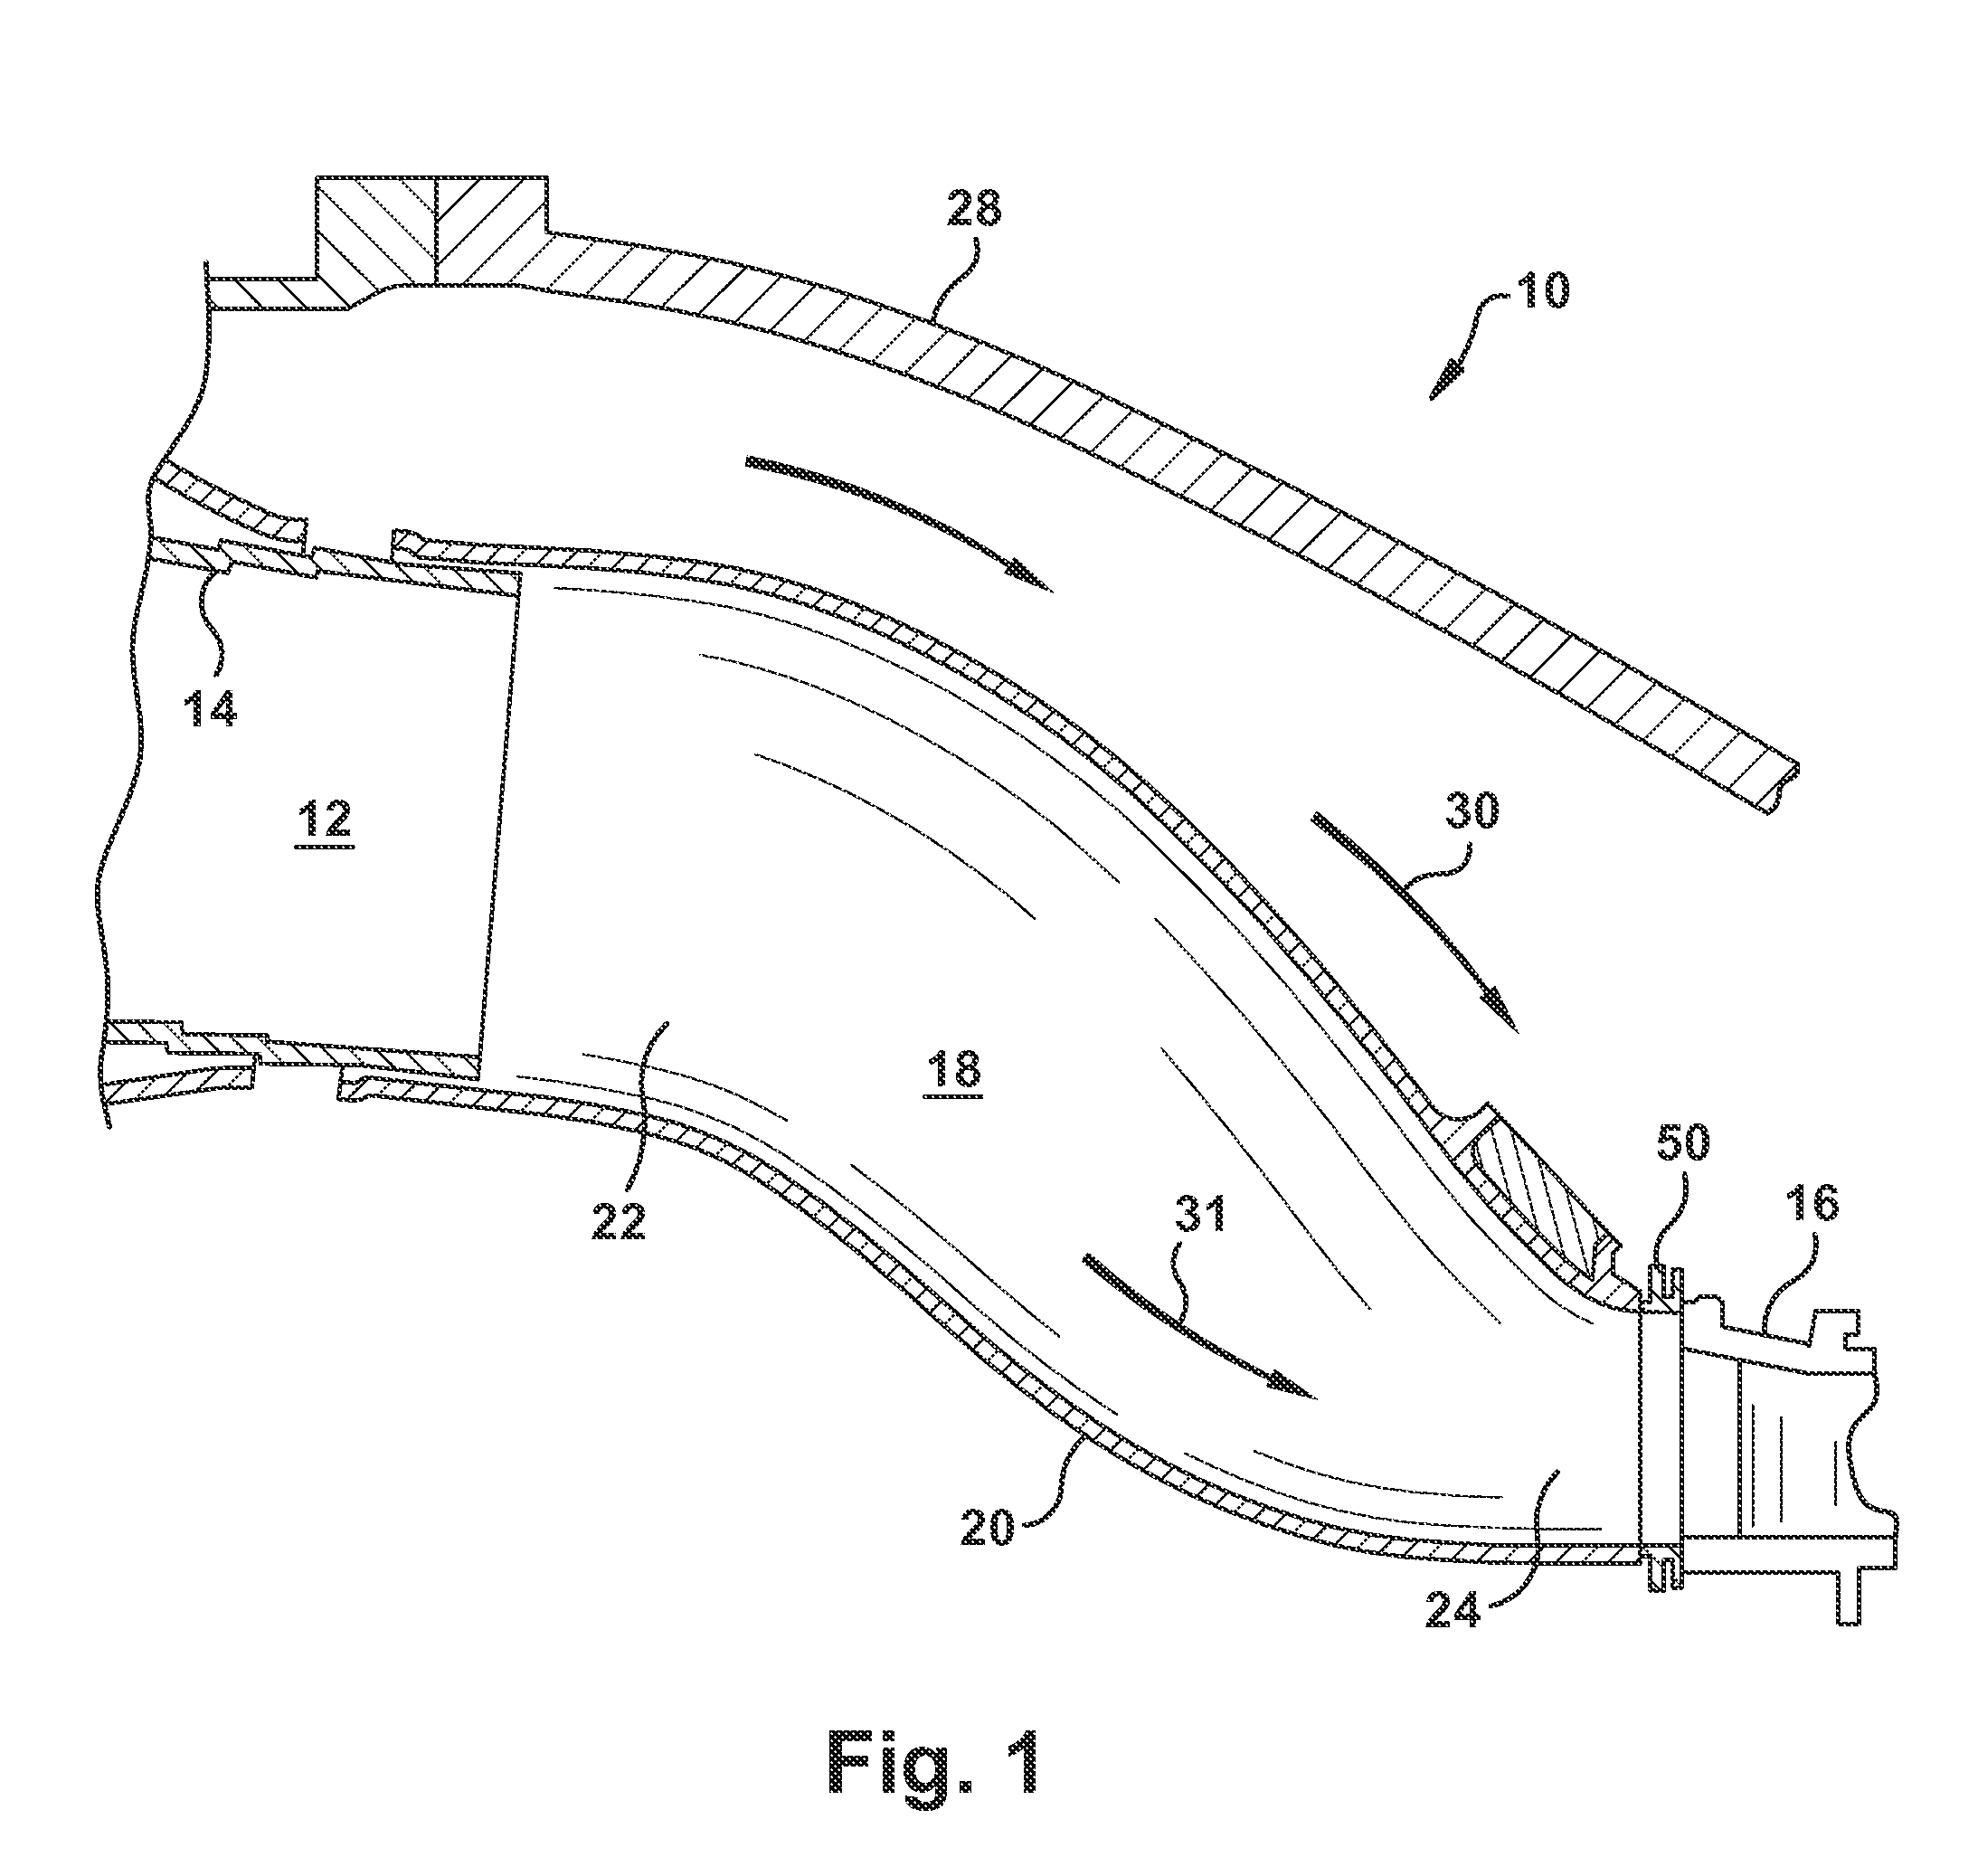 Gas turbine transition piece aft frame assemblies with cooling channels and methods for manufacturing the same